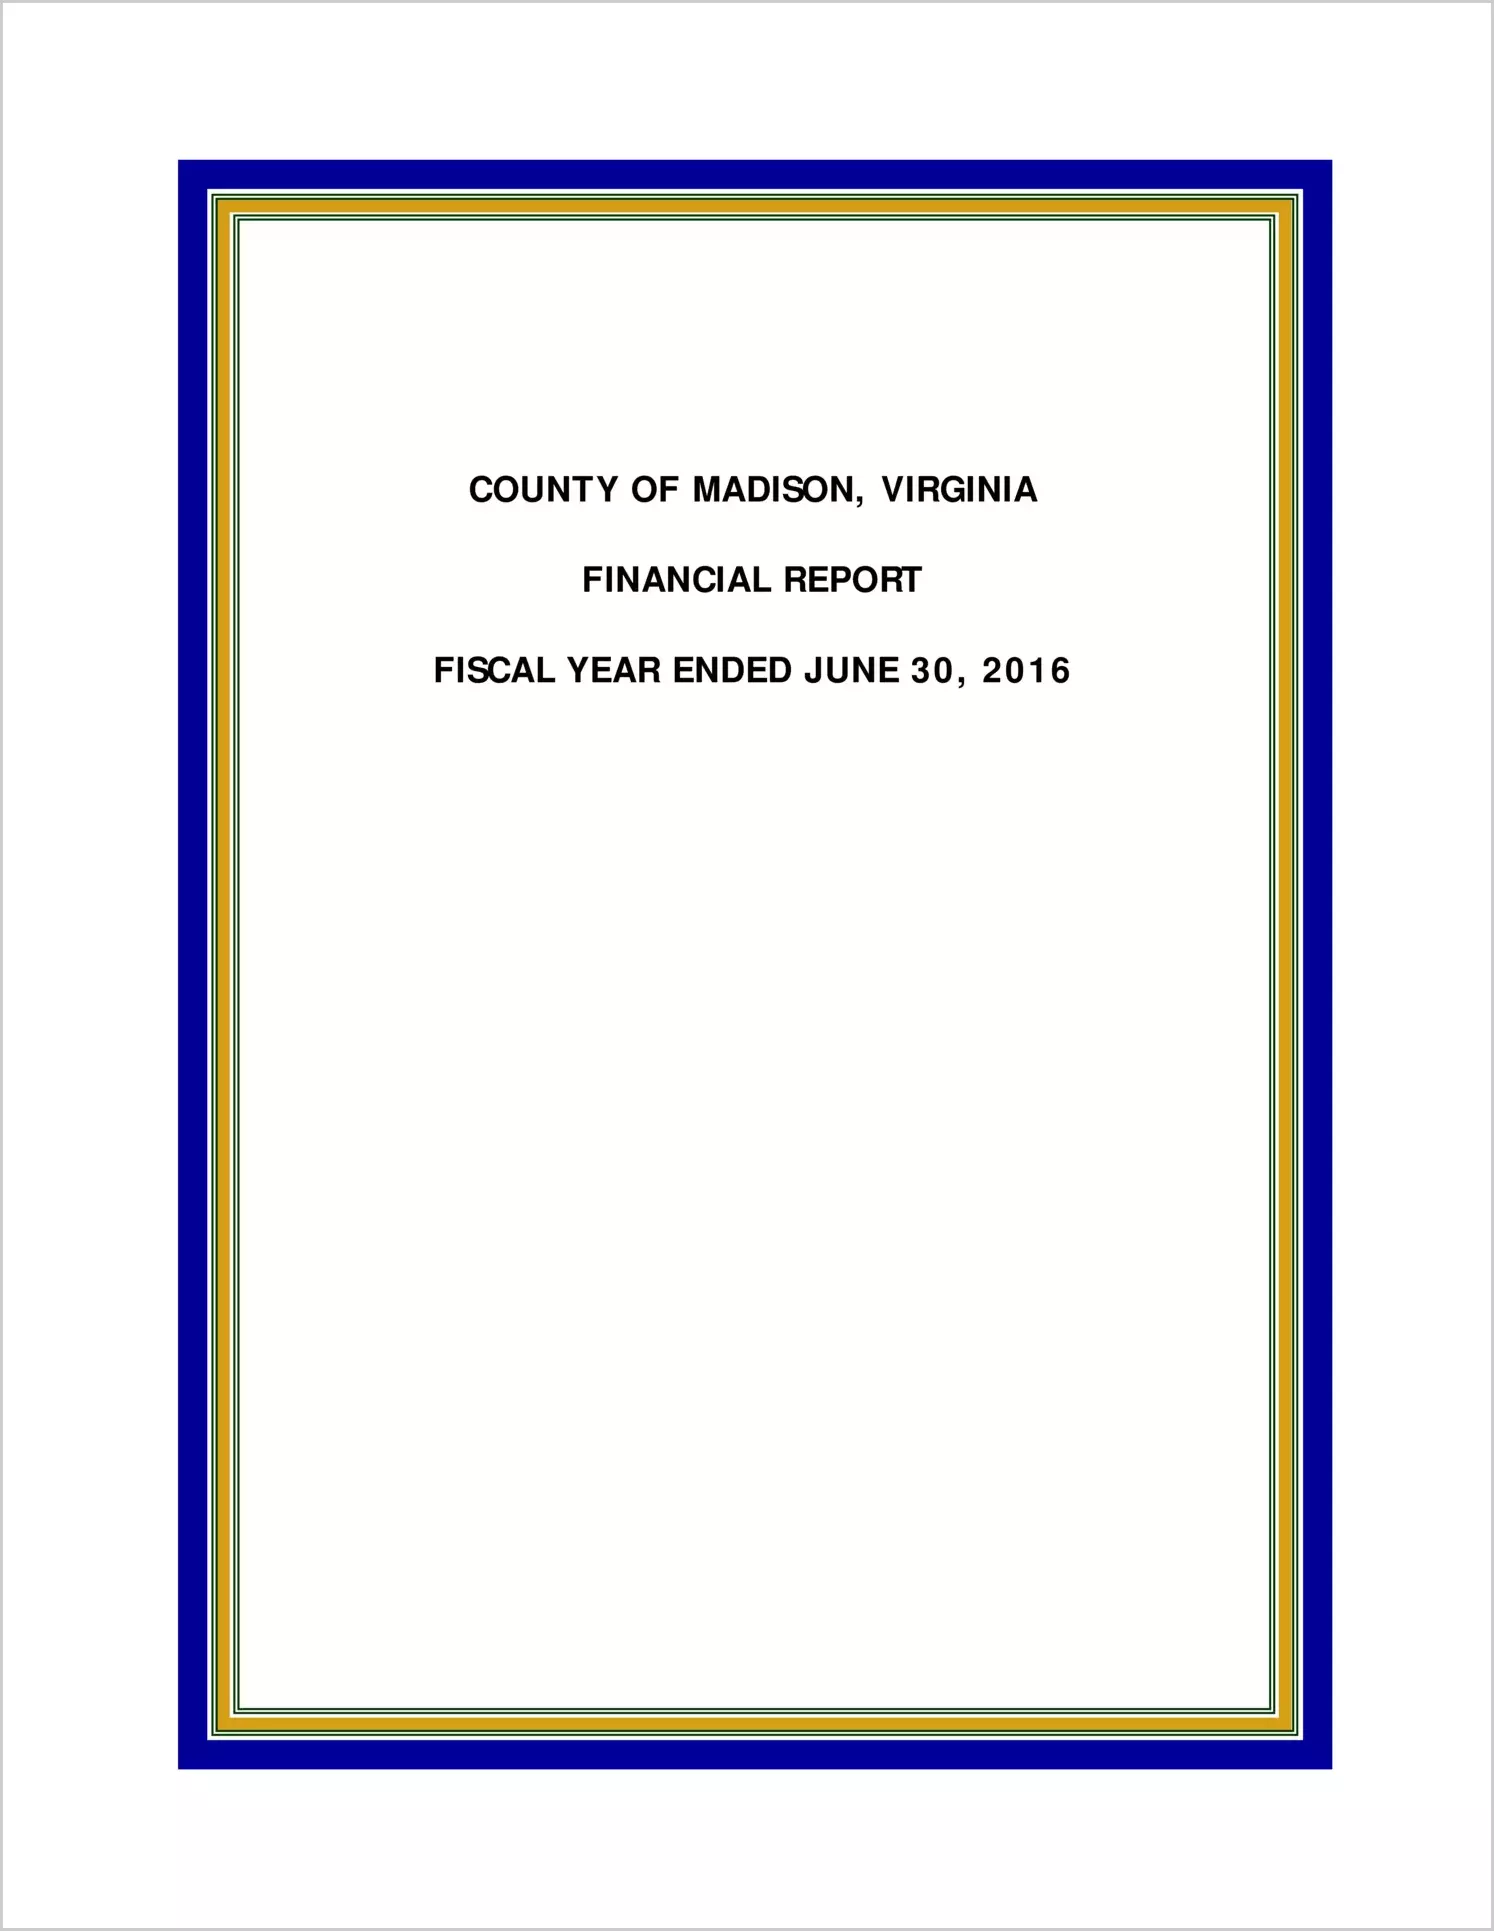 2016 Annual Financial Report for County of Madison